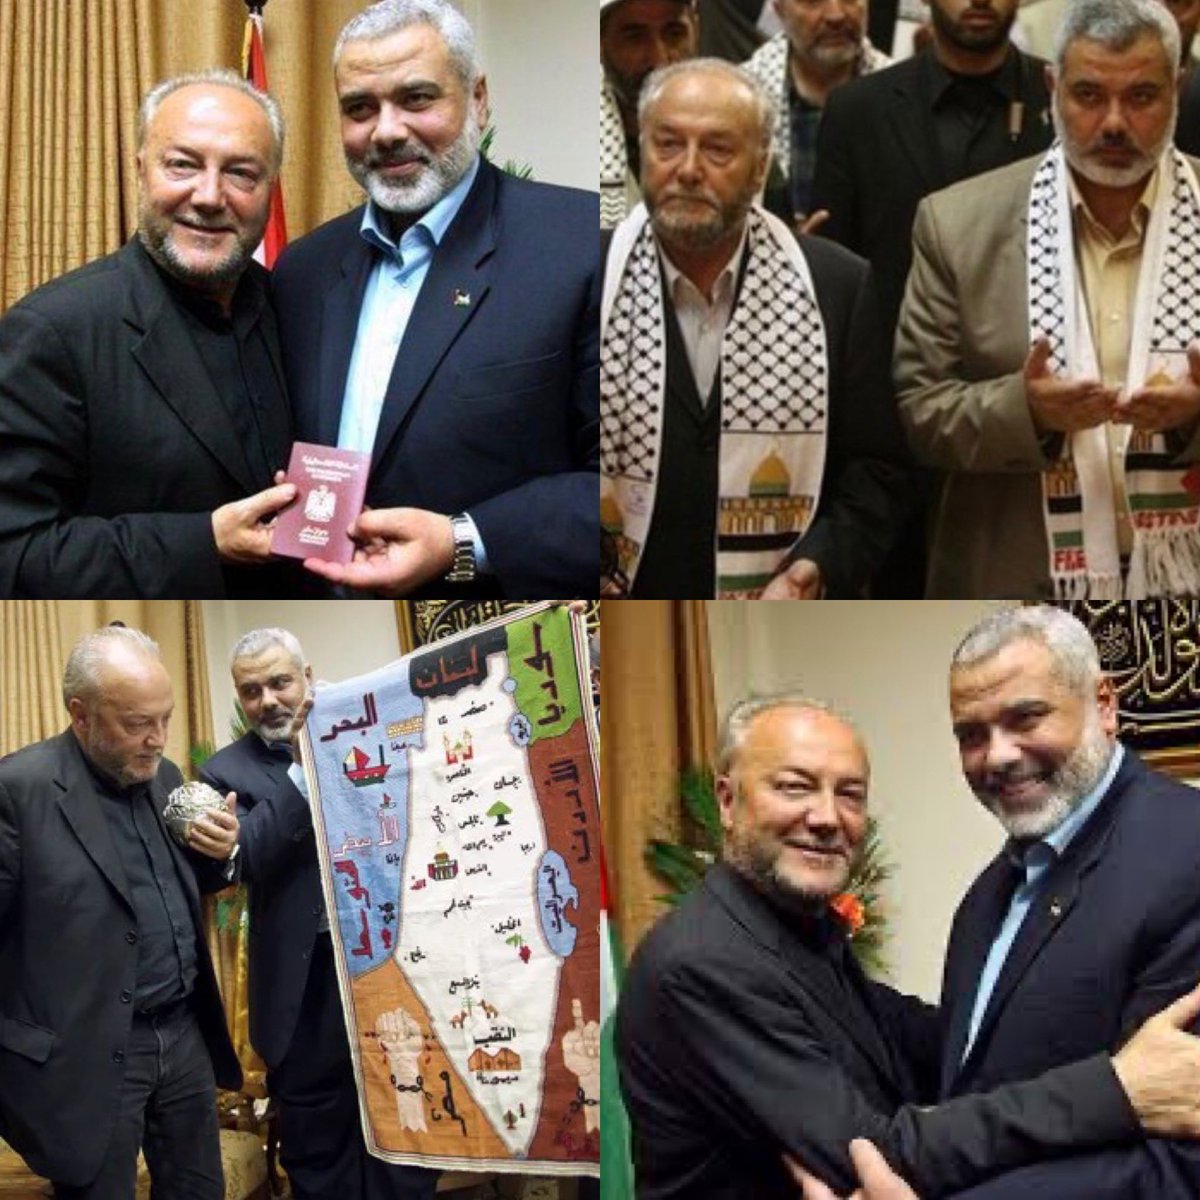 🚨 ROCHDALE By-Election candidate George Galloway caught in Photos with 𝙃𝘼𝙈𝘼𝙎 𝘾𝙀𝙊 Ismail Haniyeh 🚨 𝙈𝙪𝙨𝙩 𝙎𝙝𝙖𝙧𝙚. George Galloway is running for the MP of Rochdale, UK 𝘁𝗵𝗶𝘀 𝗧𝗵𝘂𝗿𝘀𝗱𝗮𝘆 (𝟮𝟵𝘁𝗵 𝗙𝗲𝗯𝗿𝘂𝗮𝗿𝘆) - he MUST NOT be allowed near…